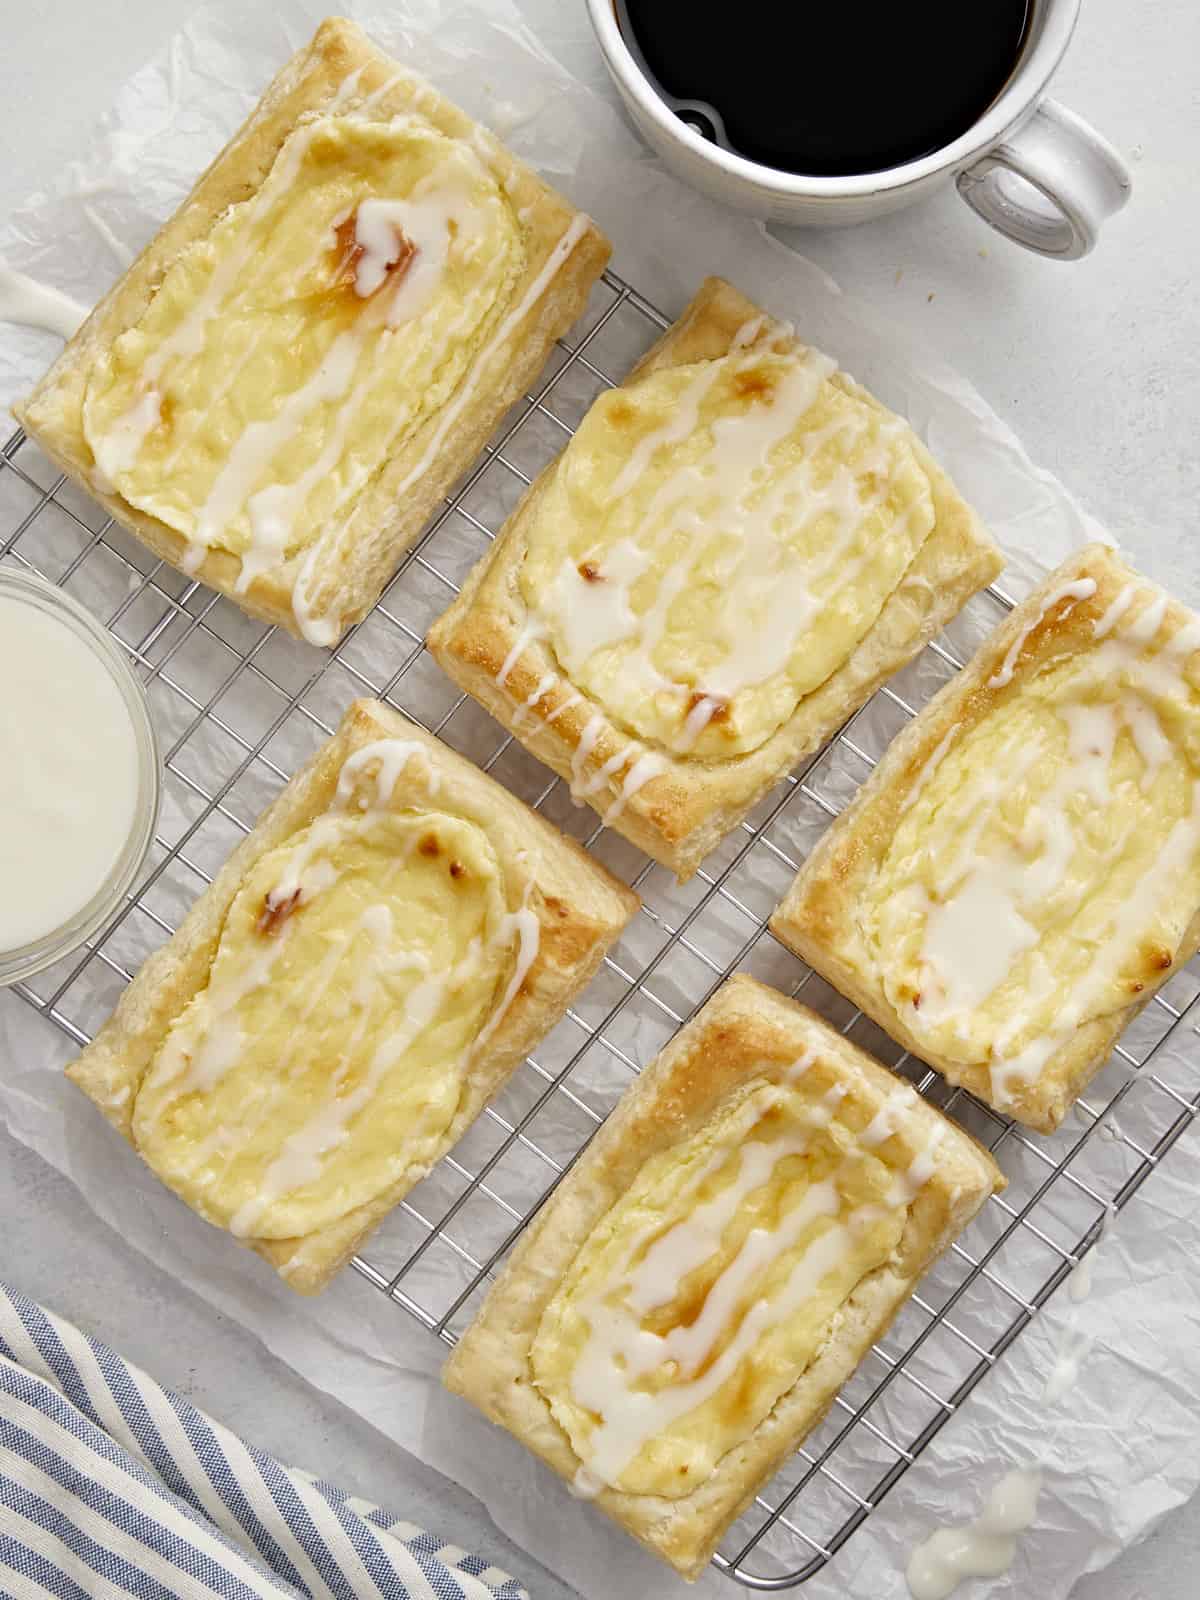 Overhead shot of cheese danish on a cooling rack with a small bowl of icing and a sup of coffee next to them.